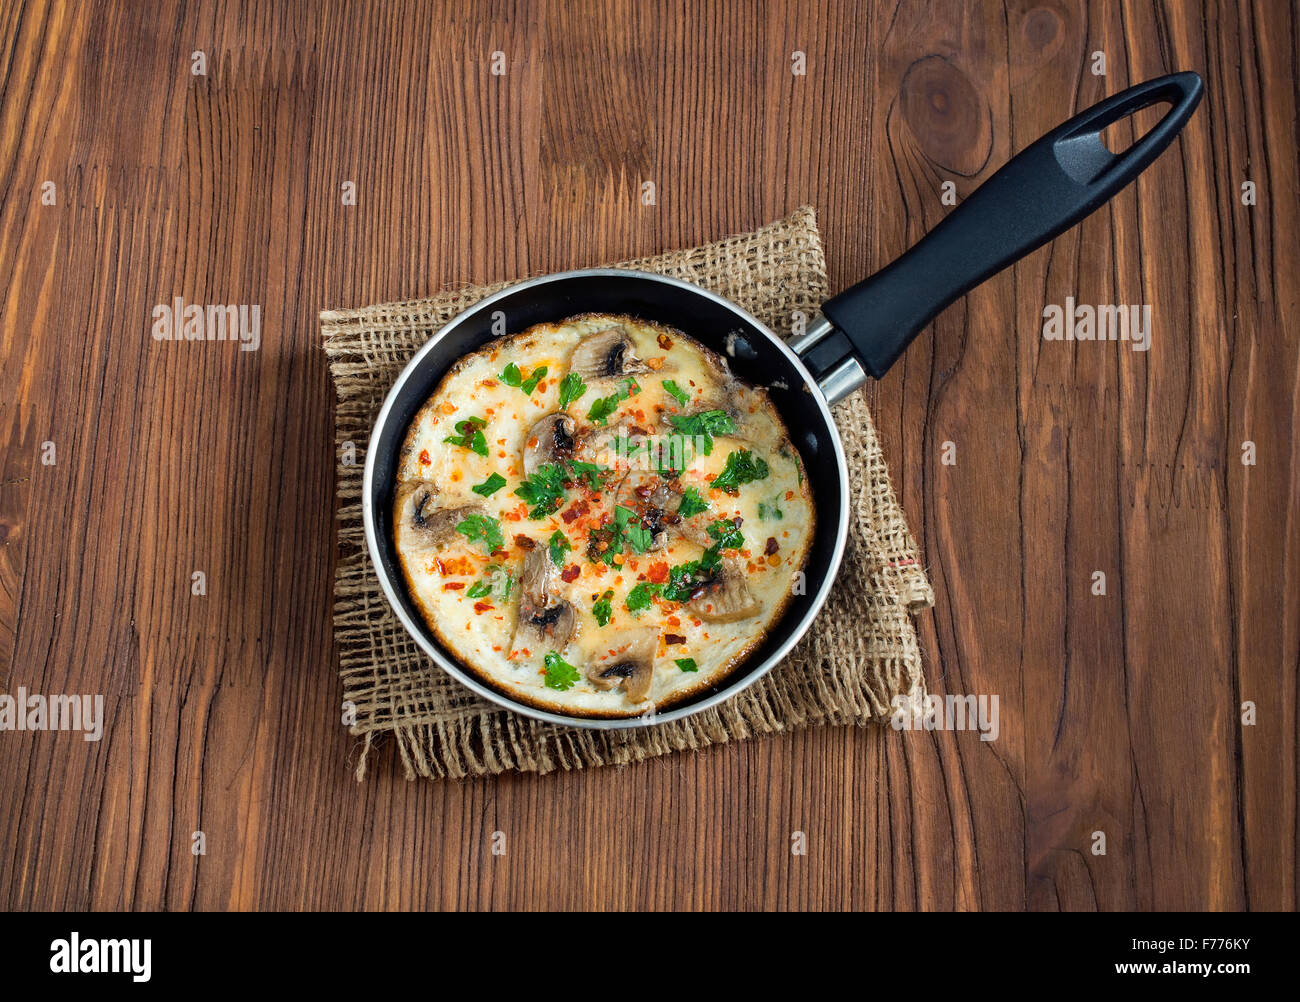 Omelet with mushrooms in a frying-pan Stock Photo